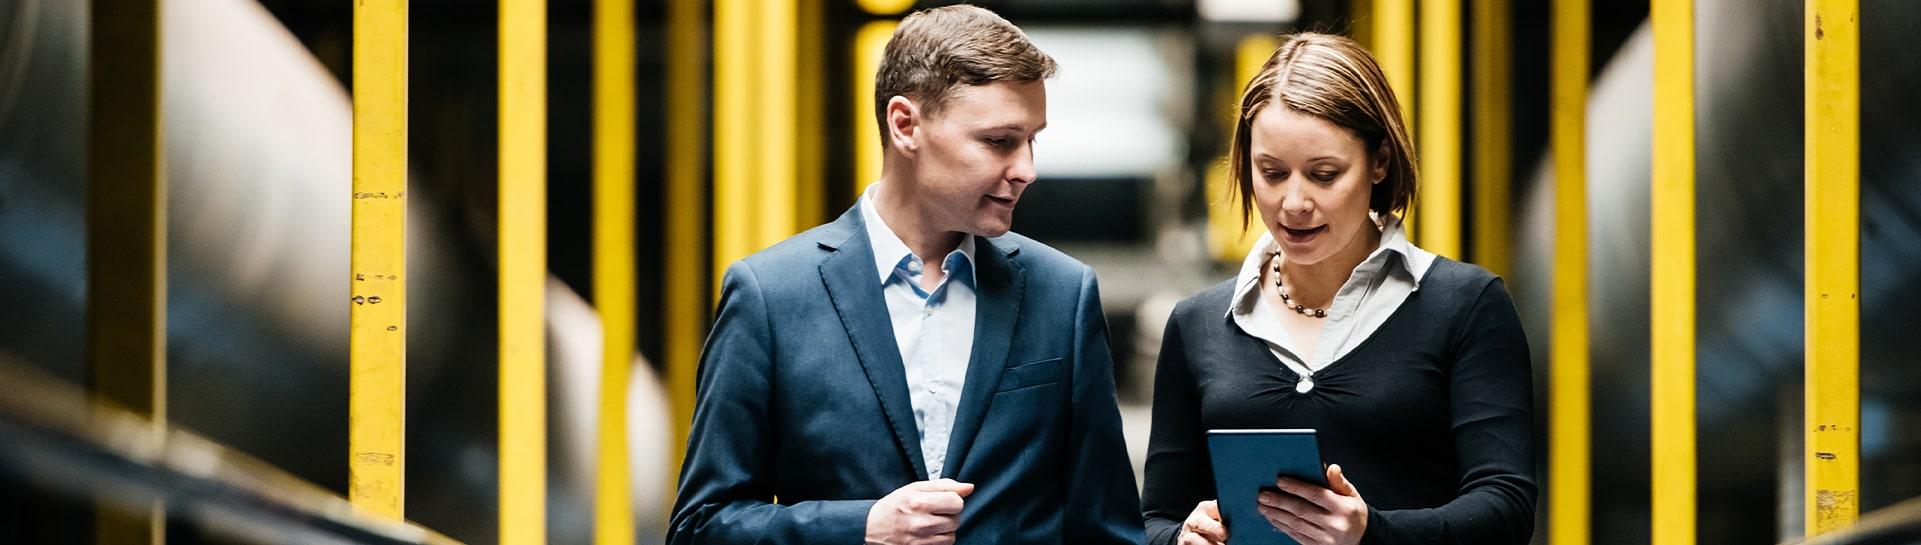 Two business people looking at a tablet